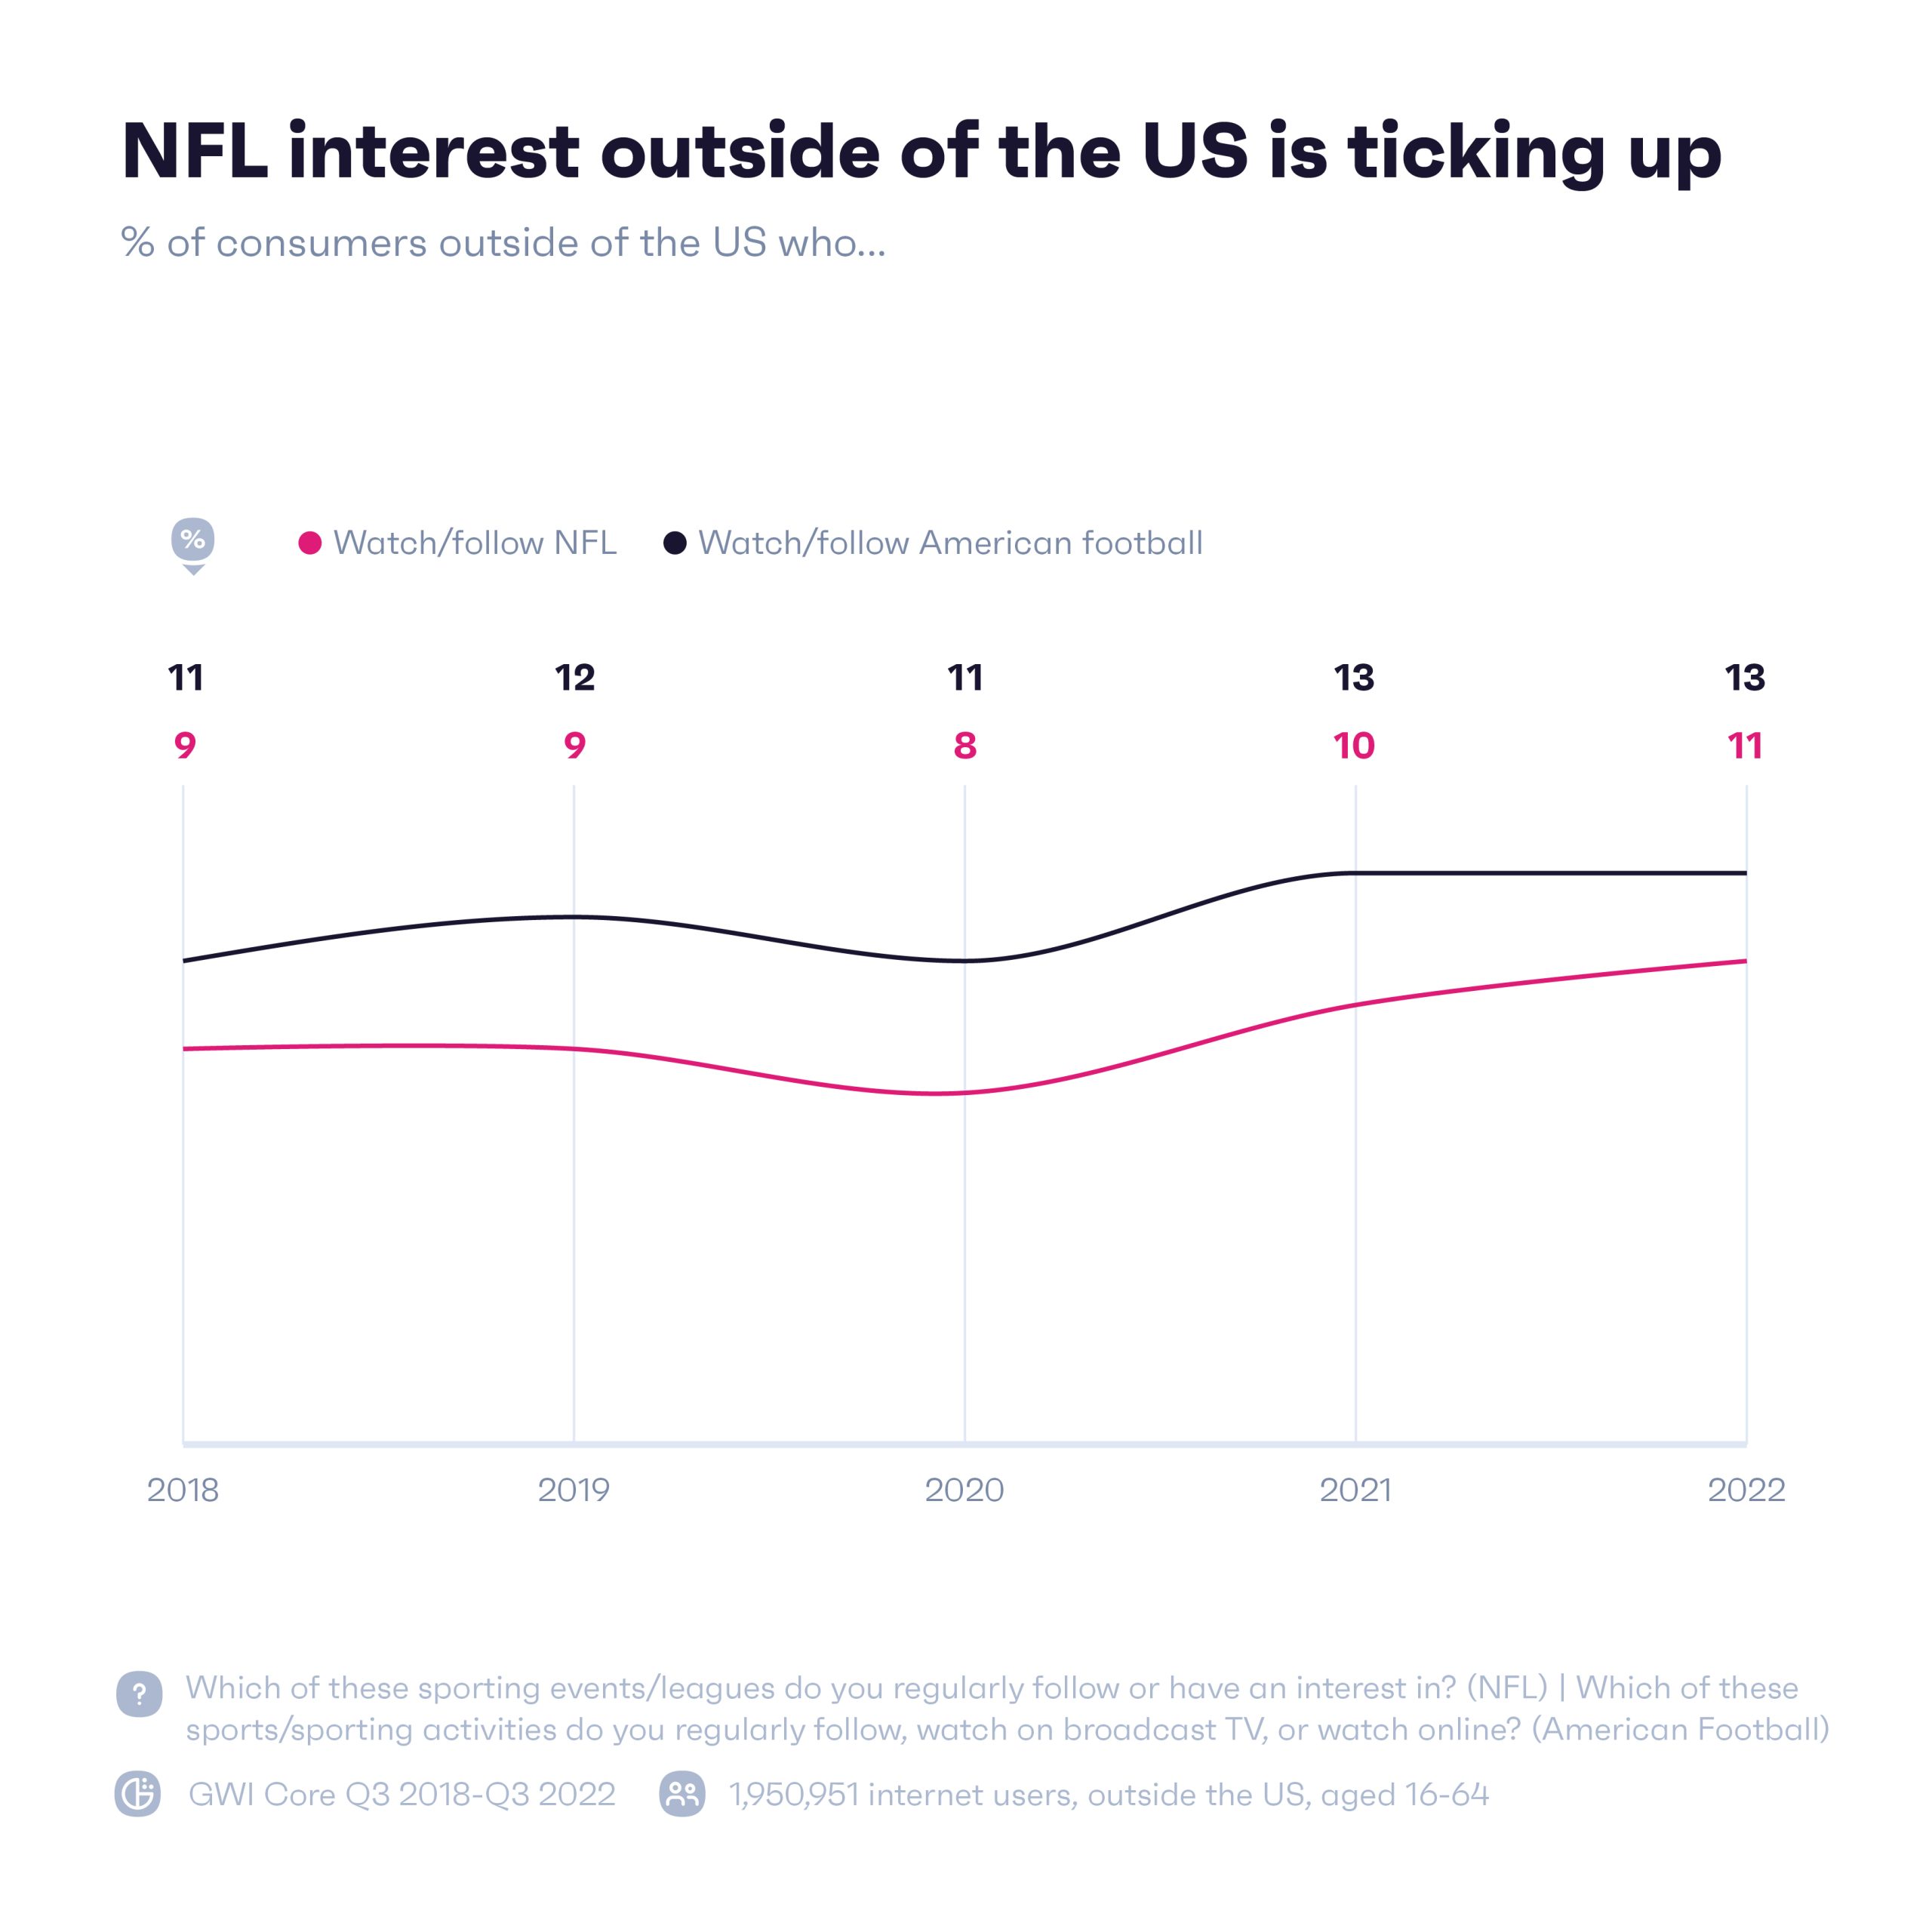 Chart showing percentage of consumers outside the US who are interested in the NFL